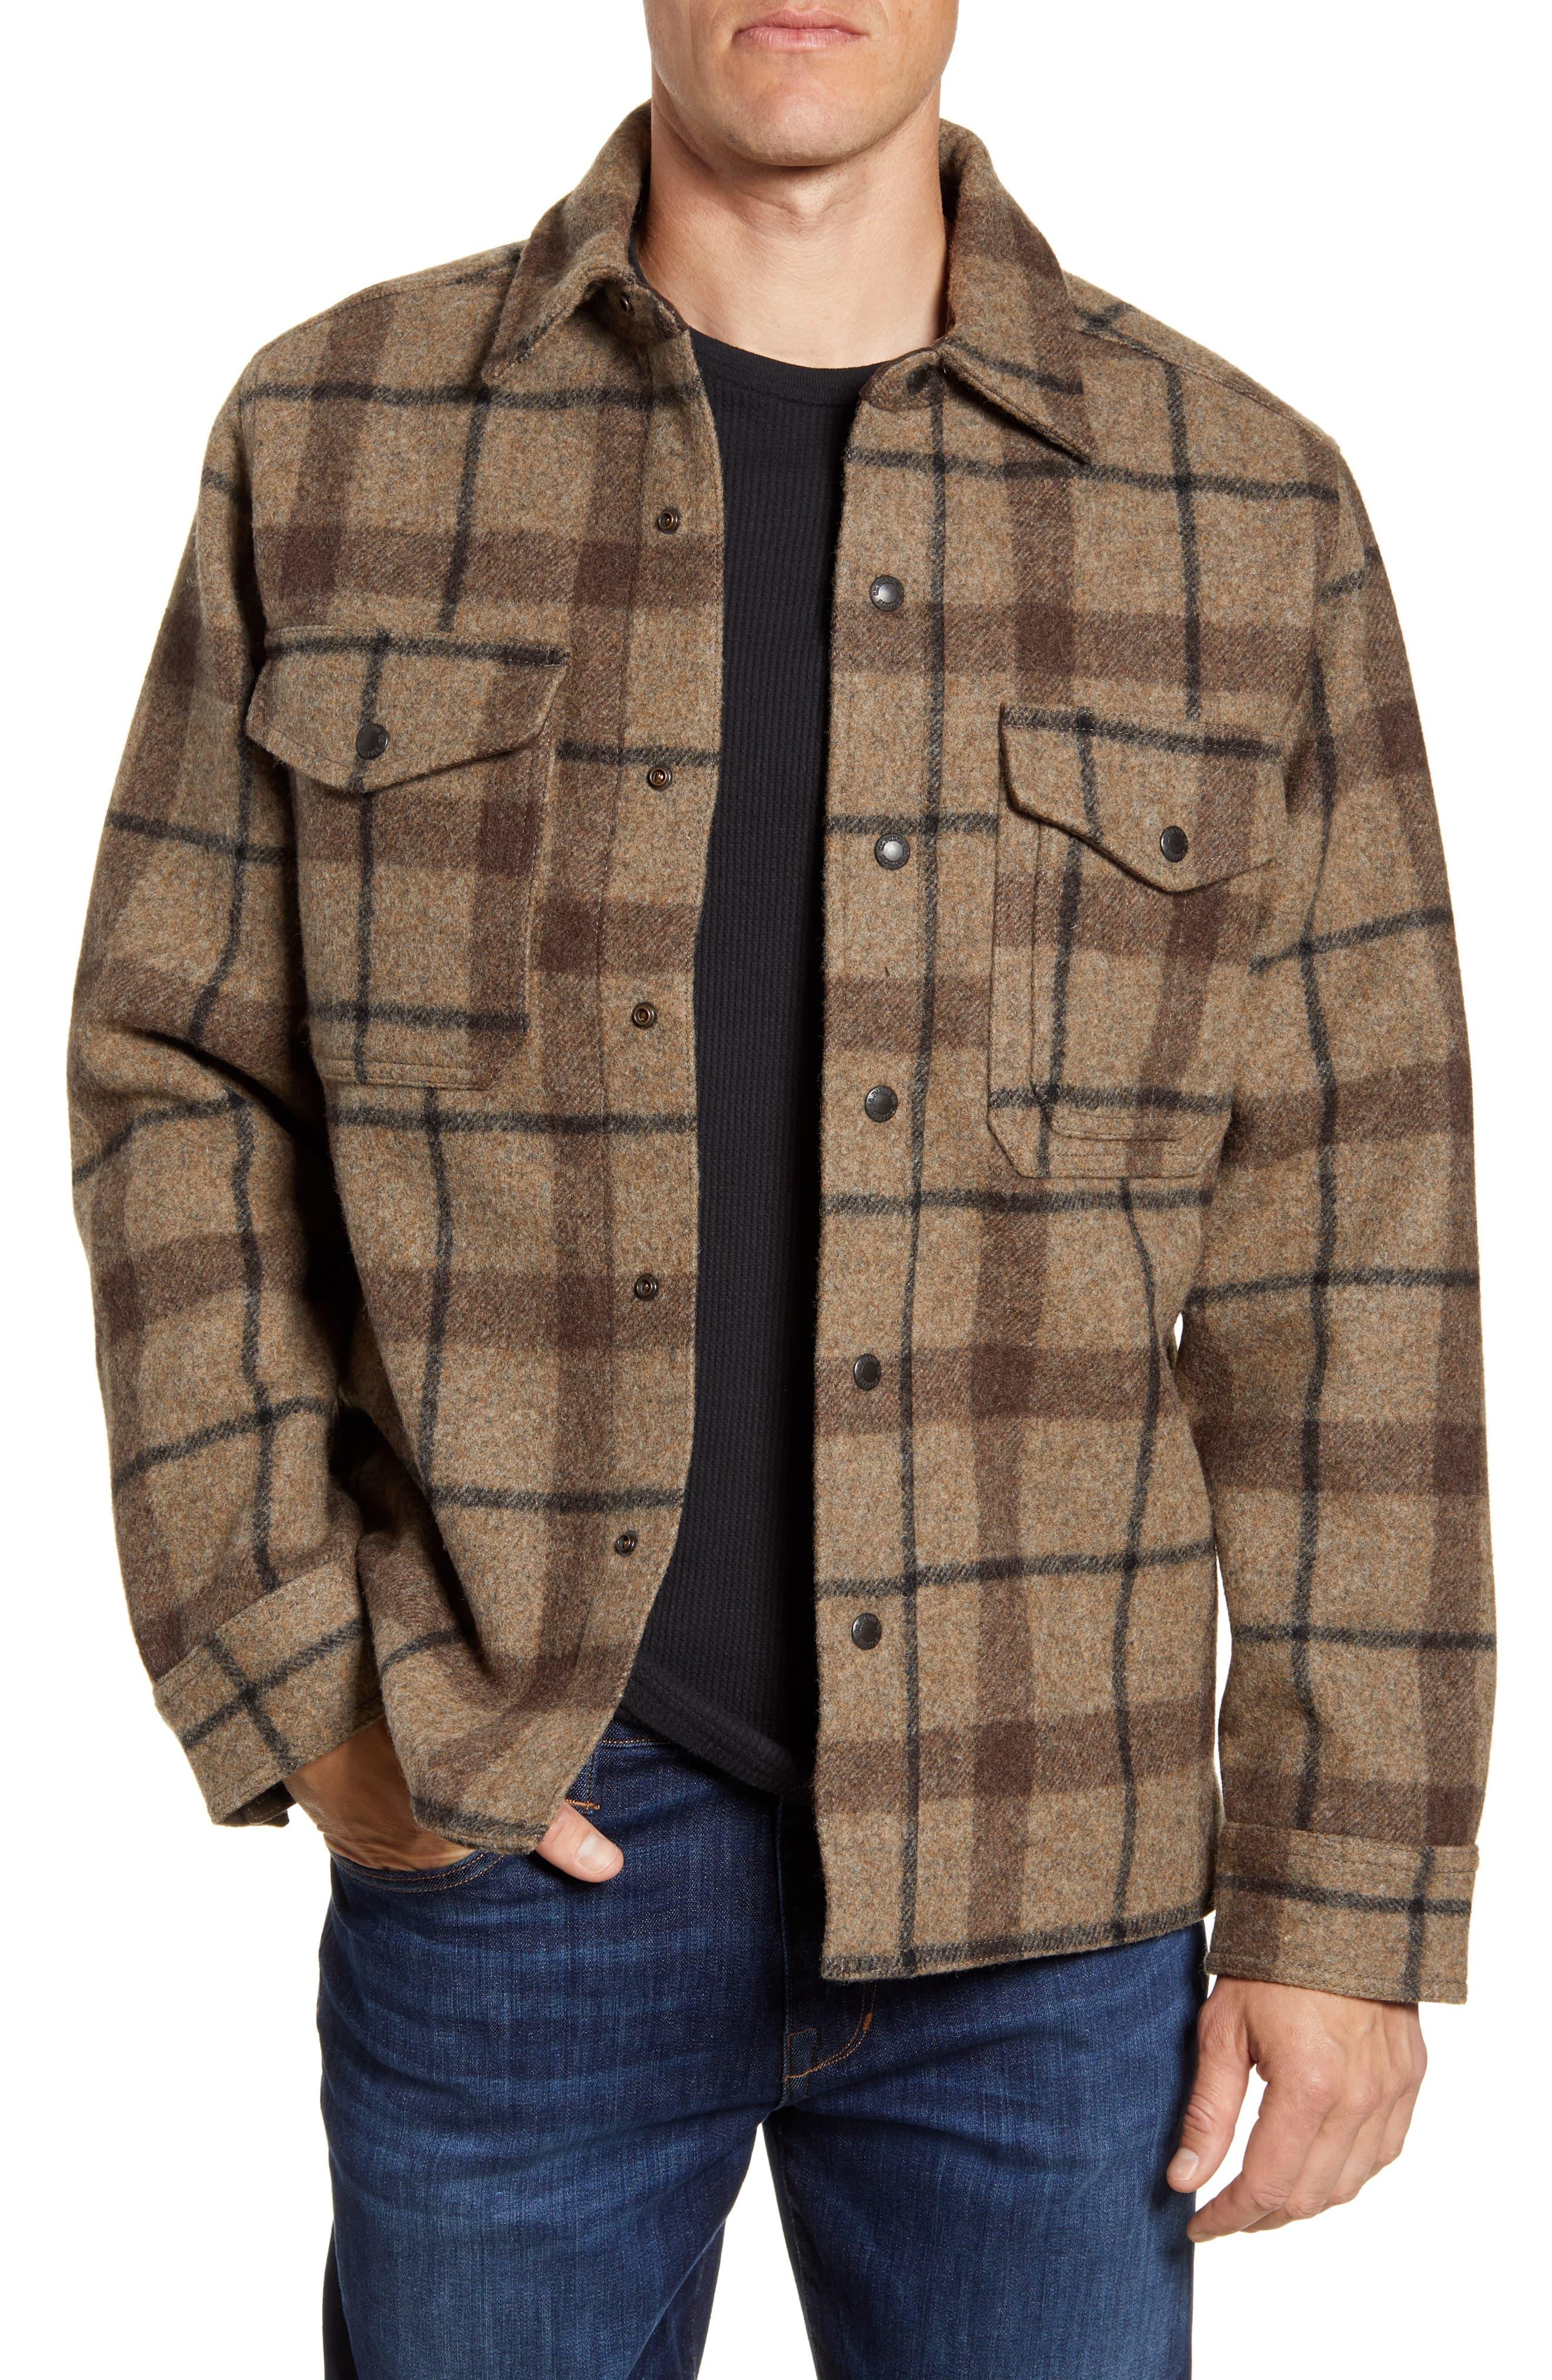 Filson Mackinaw Plaid Wool Flannel Shirt Jacket in Taupe Brown Black